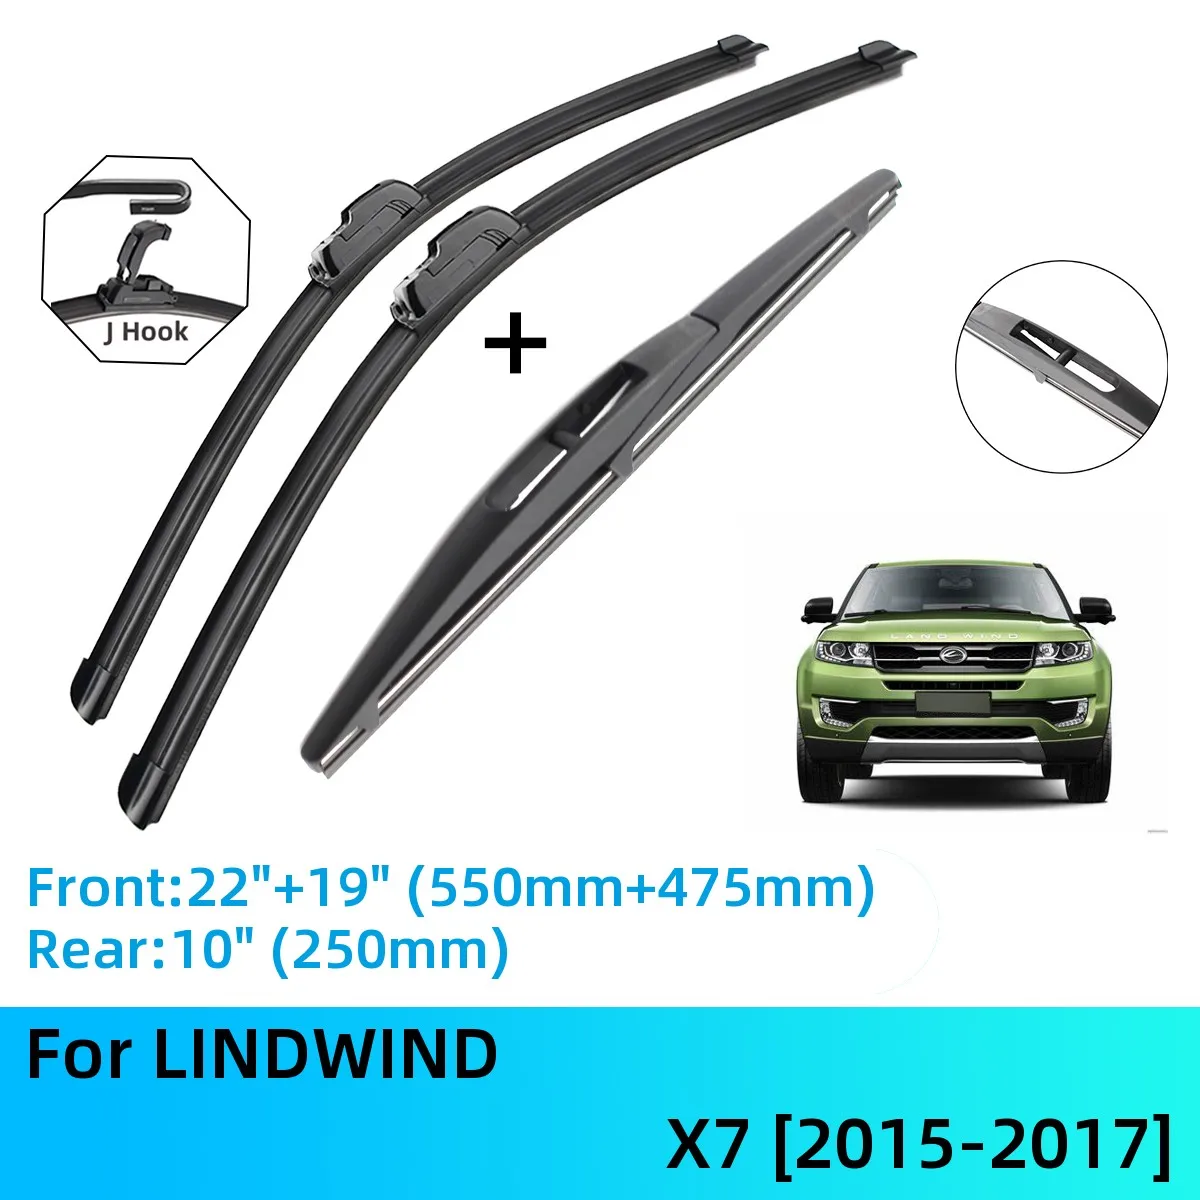 

For LINDWIND X7 Front Rear Wiper Blades Brushes Cutter Accessories J U Hook 2015-2017 2015 2016 2017